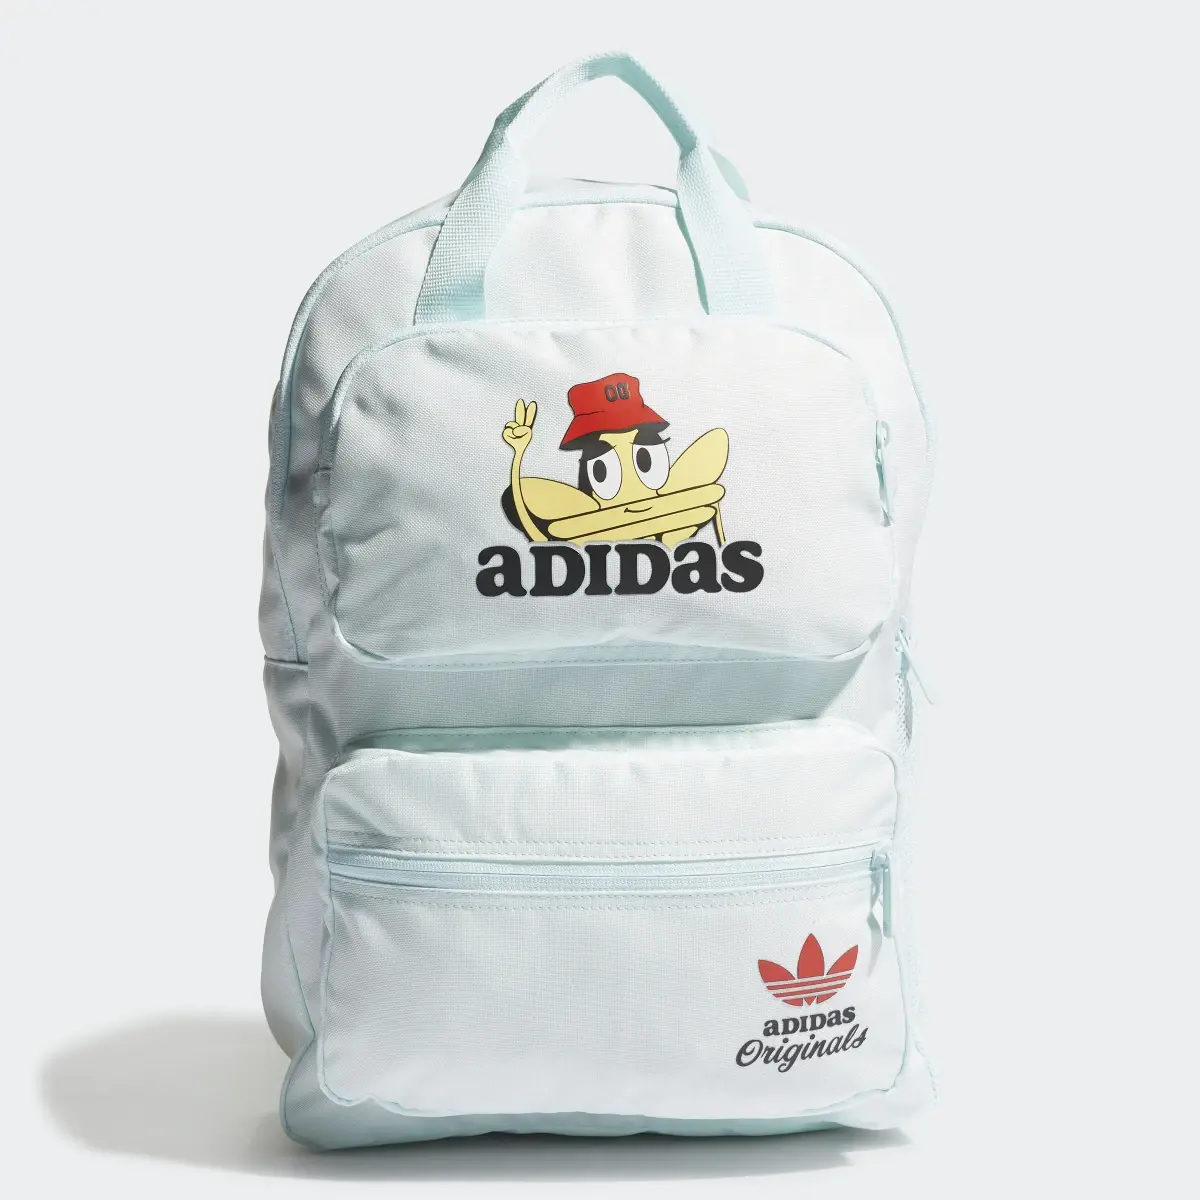 Adidas Fun Trefoil Two-Way Backpack. 1